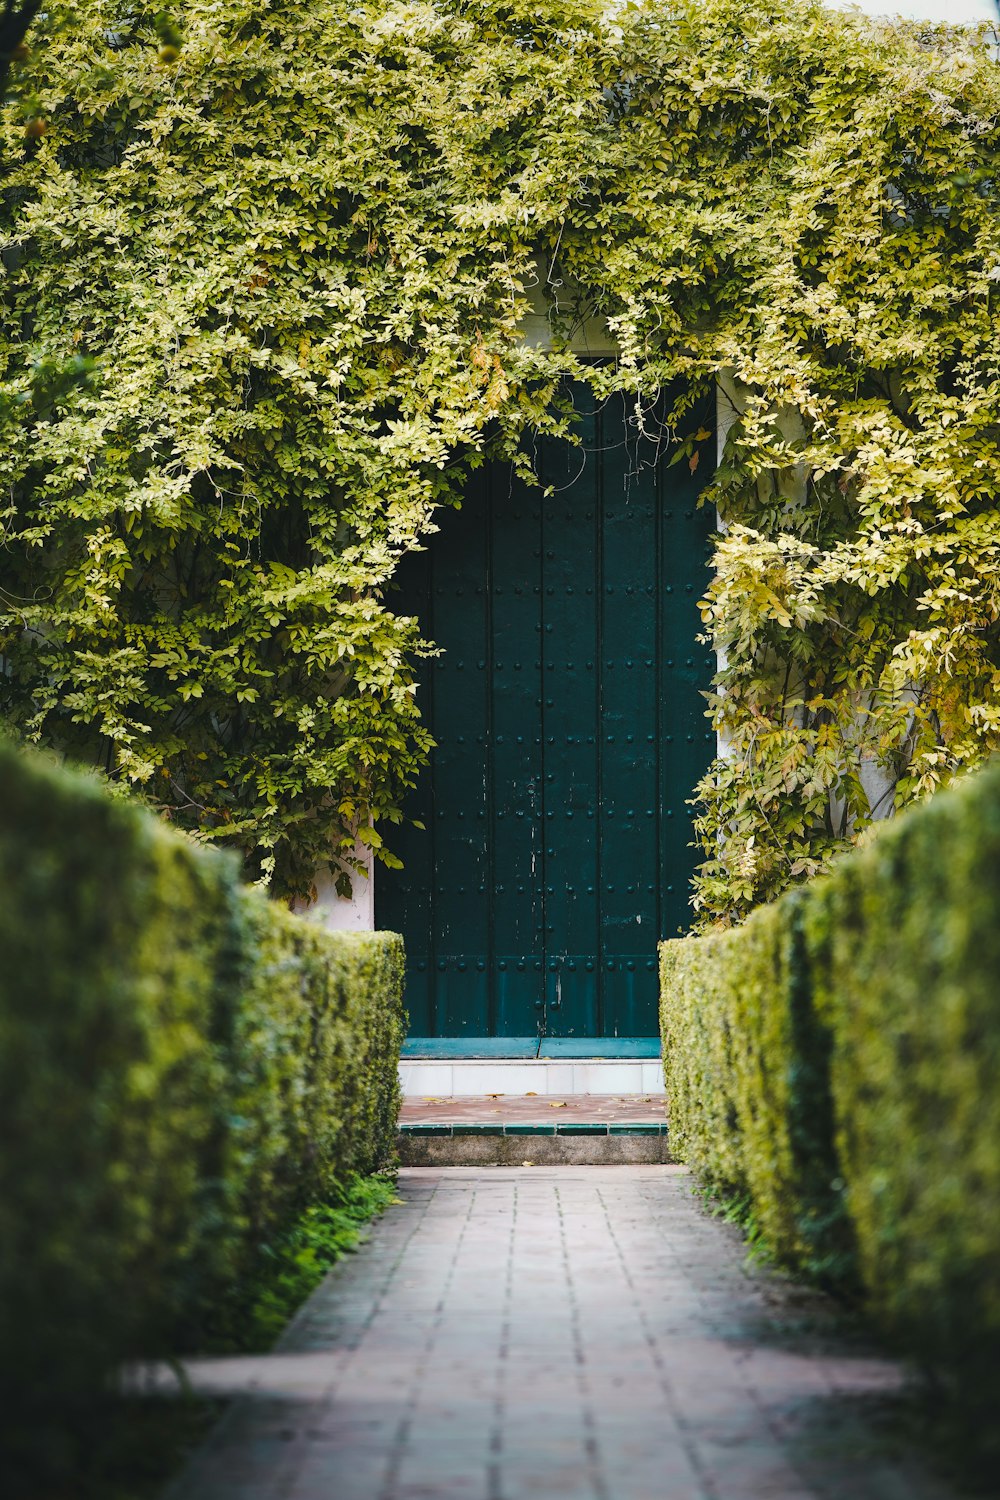 a green door surrounded by hedges and trees